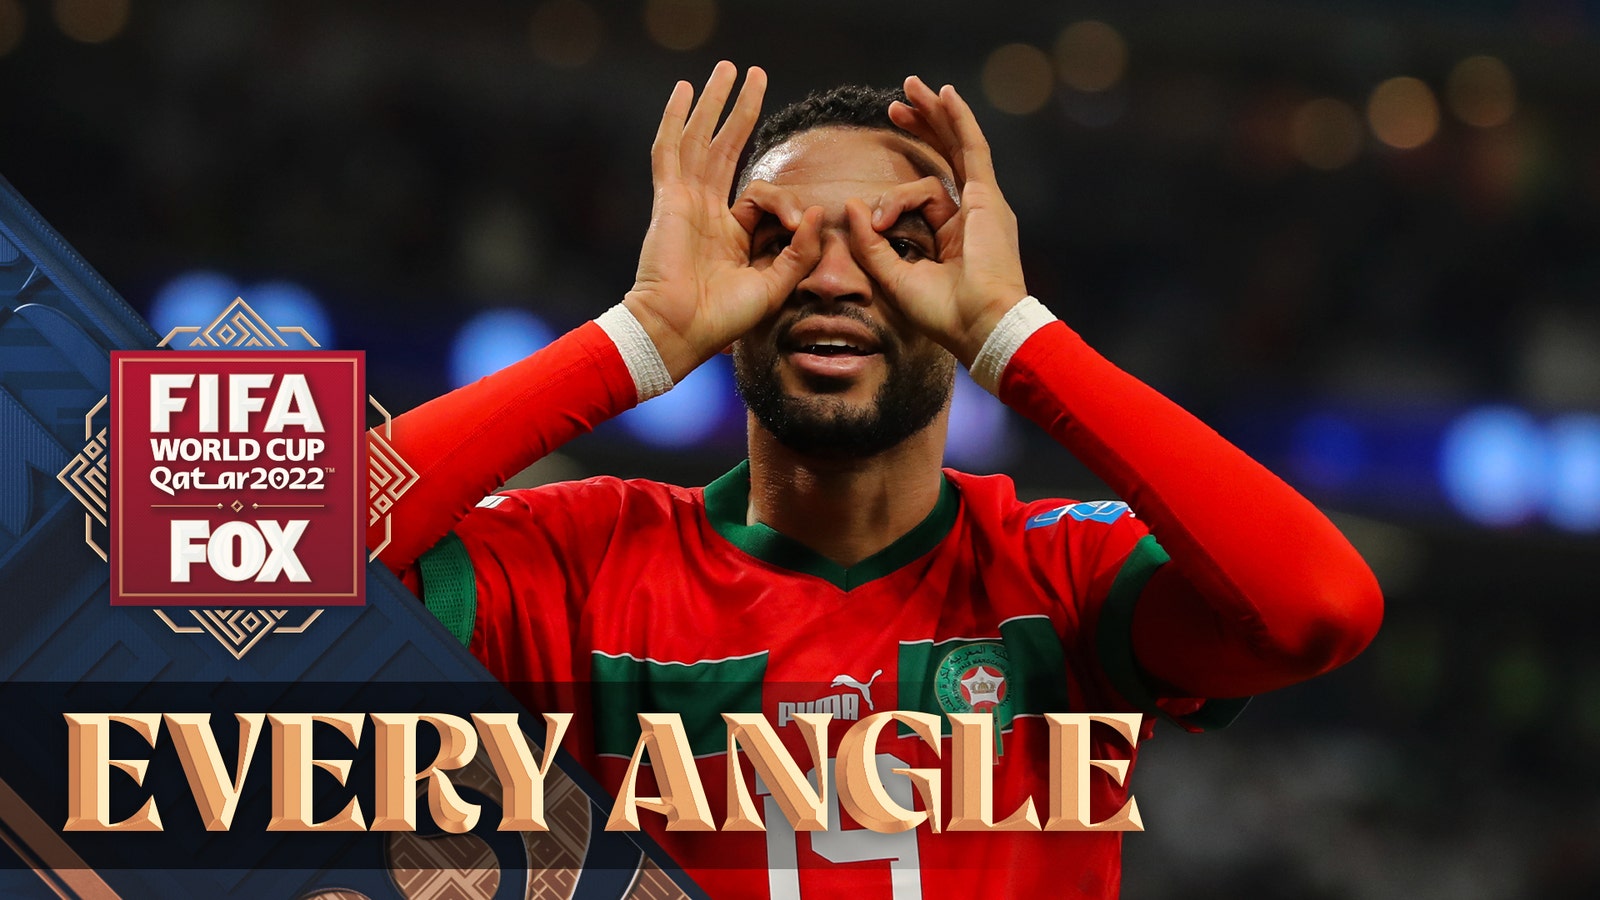 Youssef En-Nesyri scores on a RIDICULOUS header for Morocco in the 2022 FIFA World Cup | Every Angle